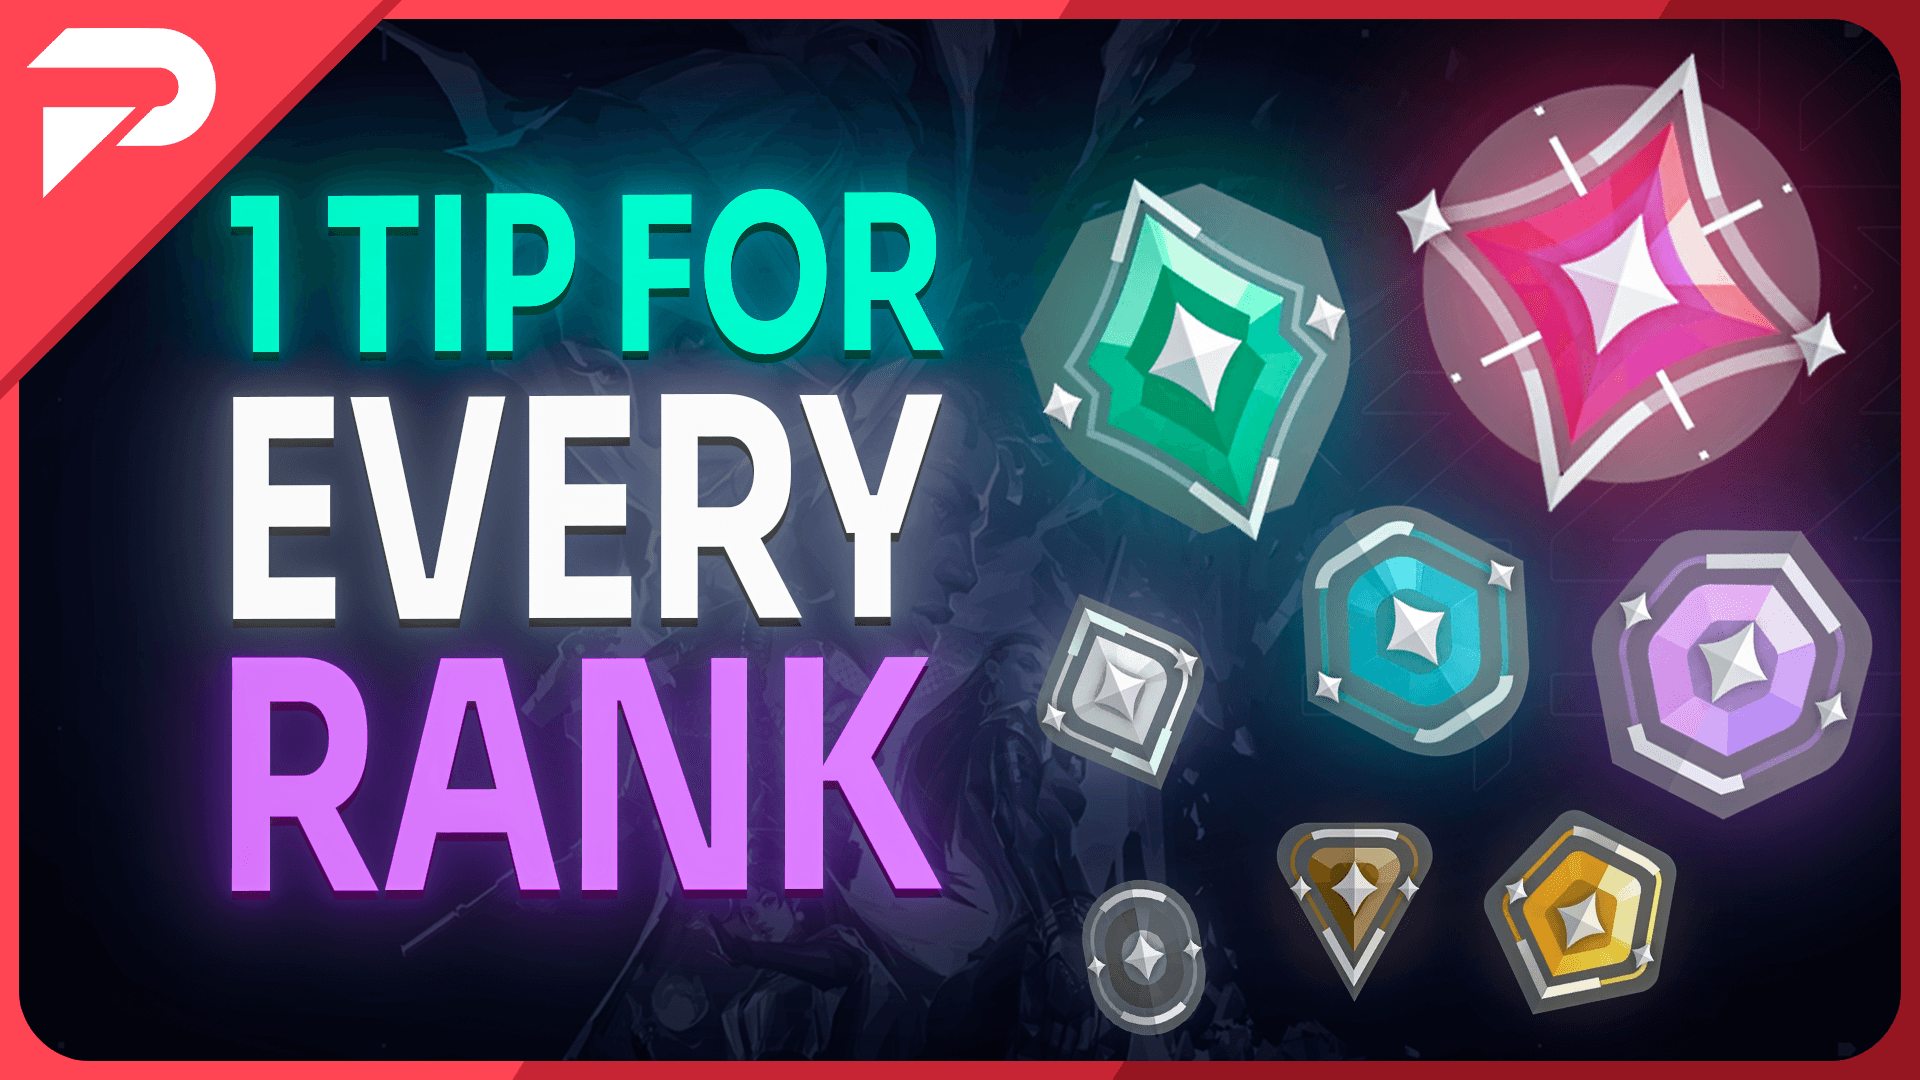 From Iron to Radiant: Valorant Tips to Accelerate Your Rank Progression